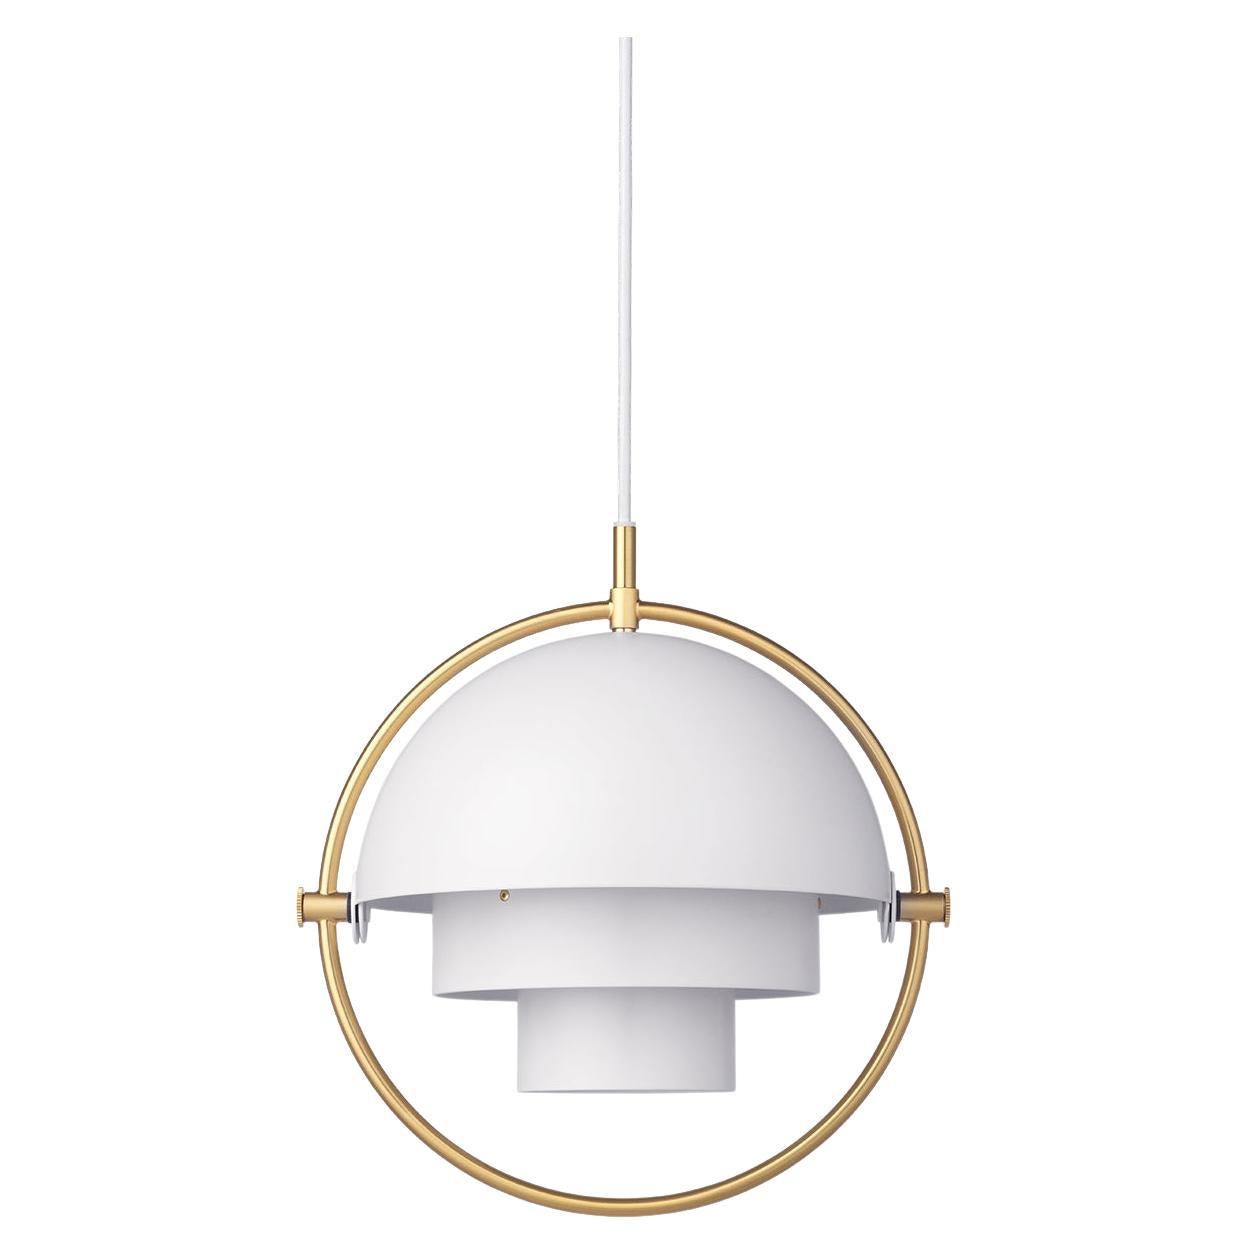 The Multi-Lite pendant embraces the golden era of Danish design with its characteristic shape of two opposing outside, mobile shades that enable creating a personal installation and a wide range of lighting values in a room.

The Multi-Lite